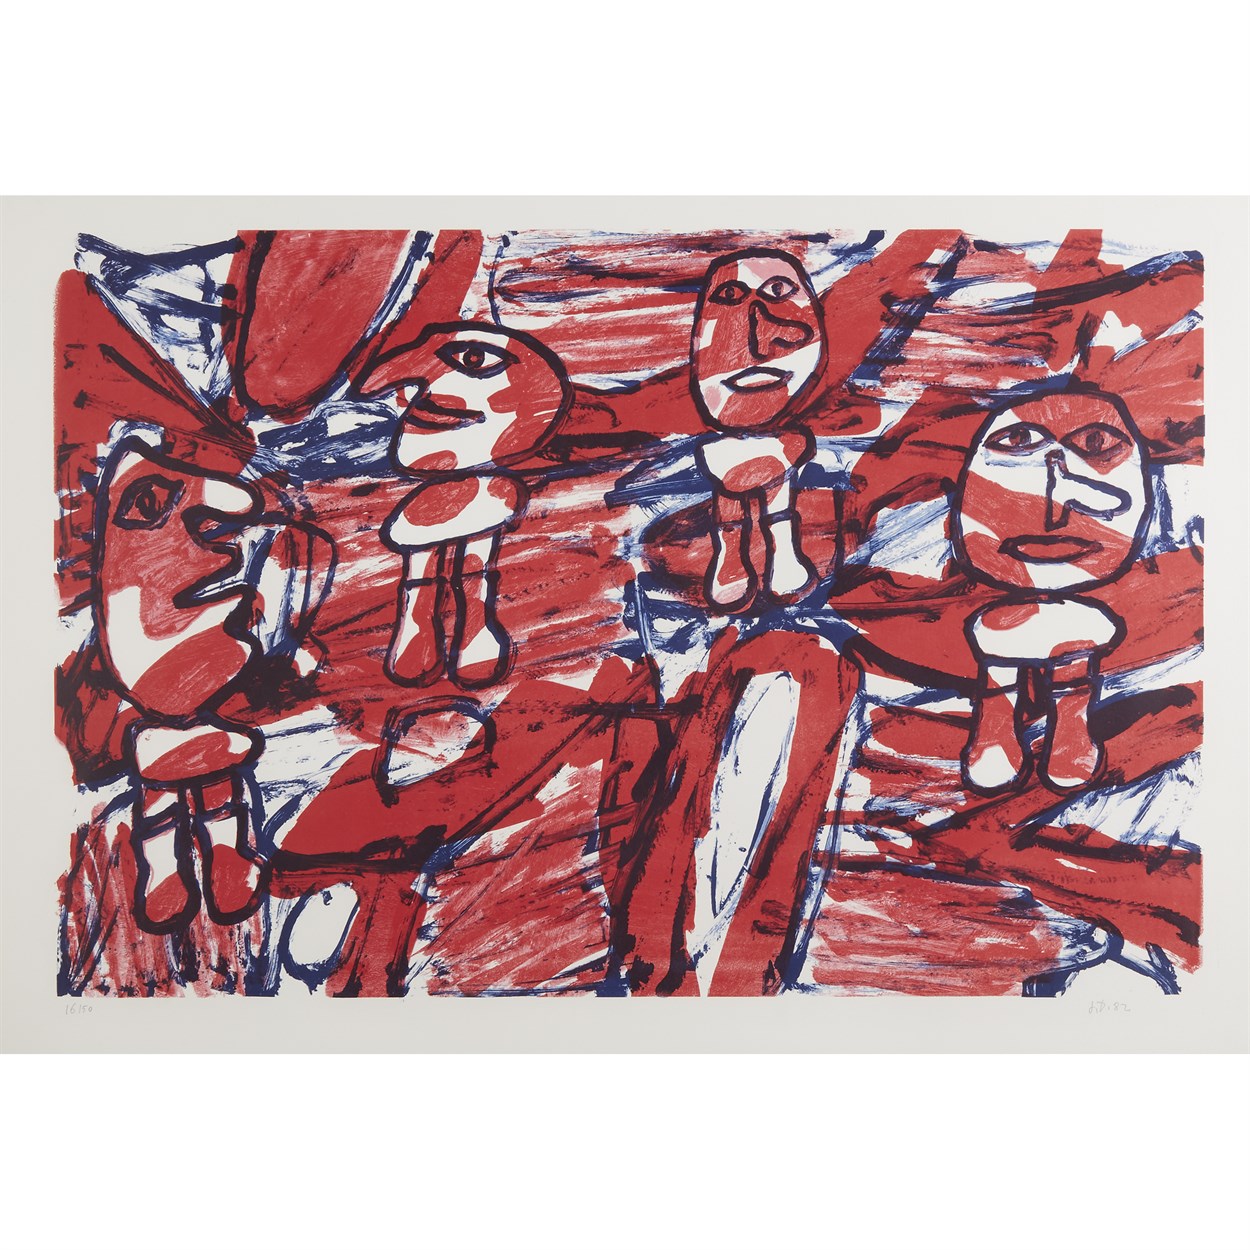 Lot 47 - JEAN DUBUFFET  (FRENCH, 1901-1985)